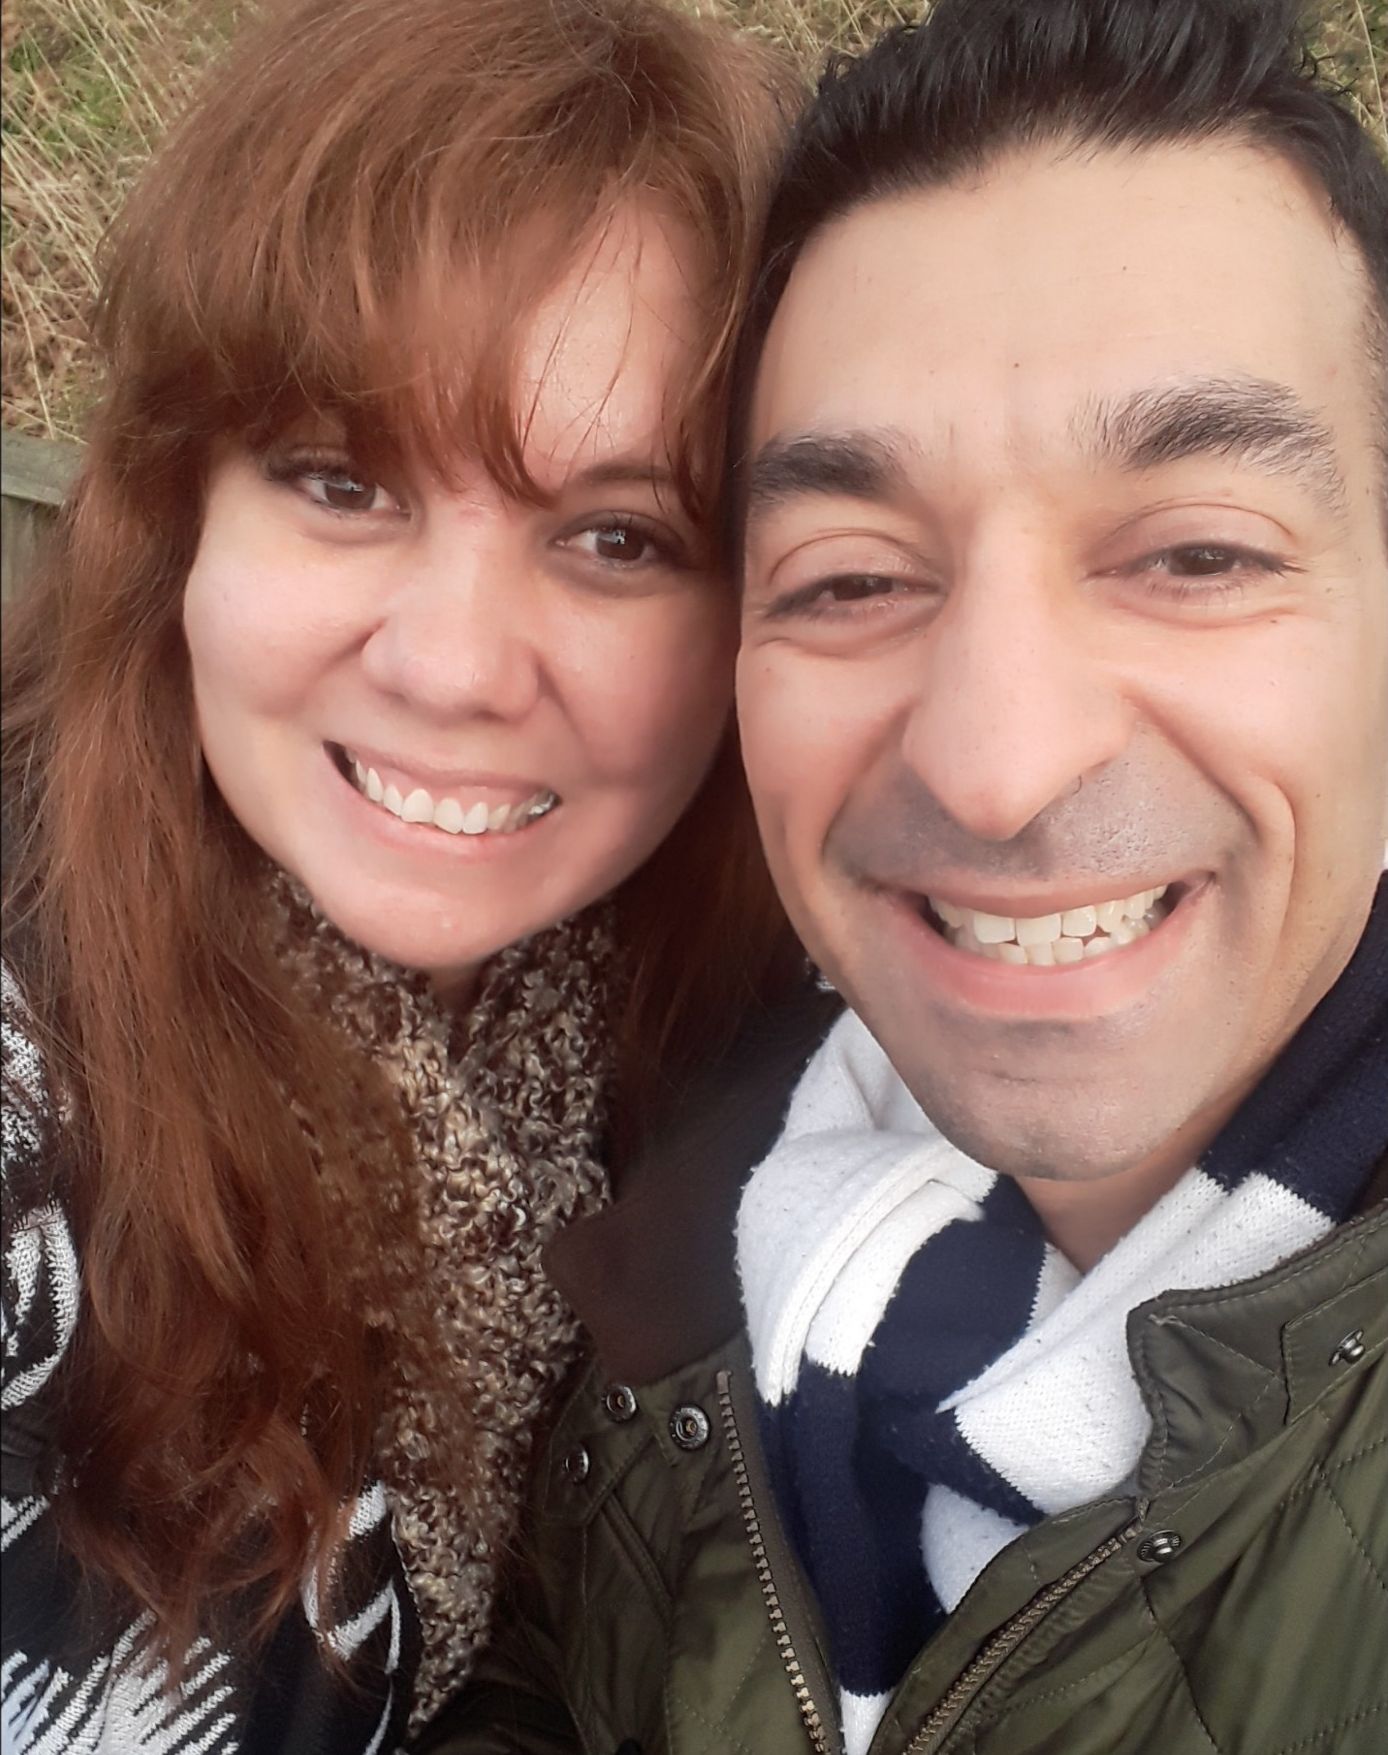 A couple pose outdoors in December while smiling for a selfie